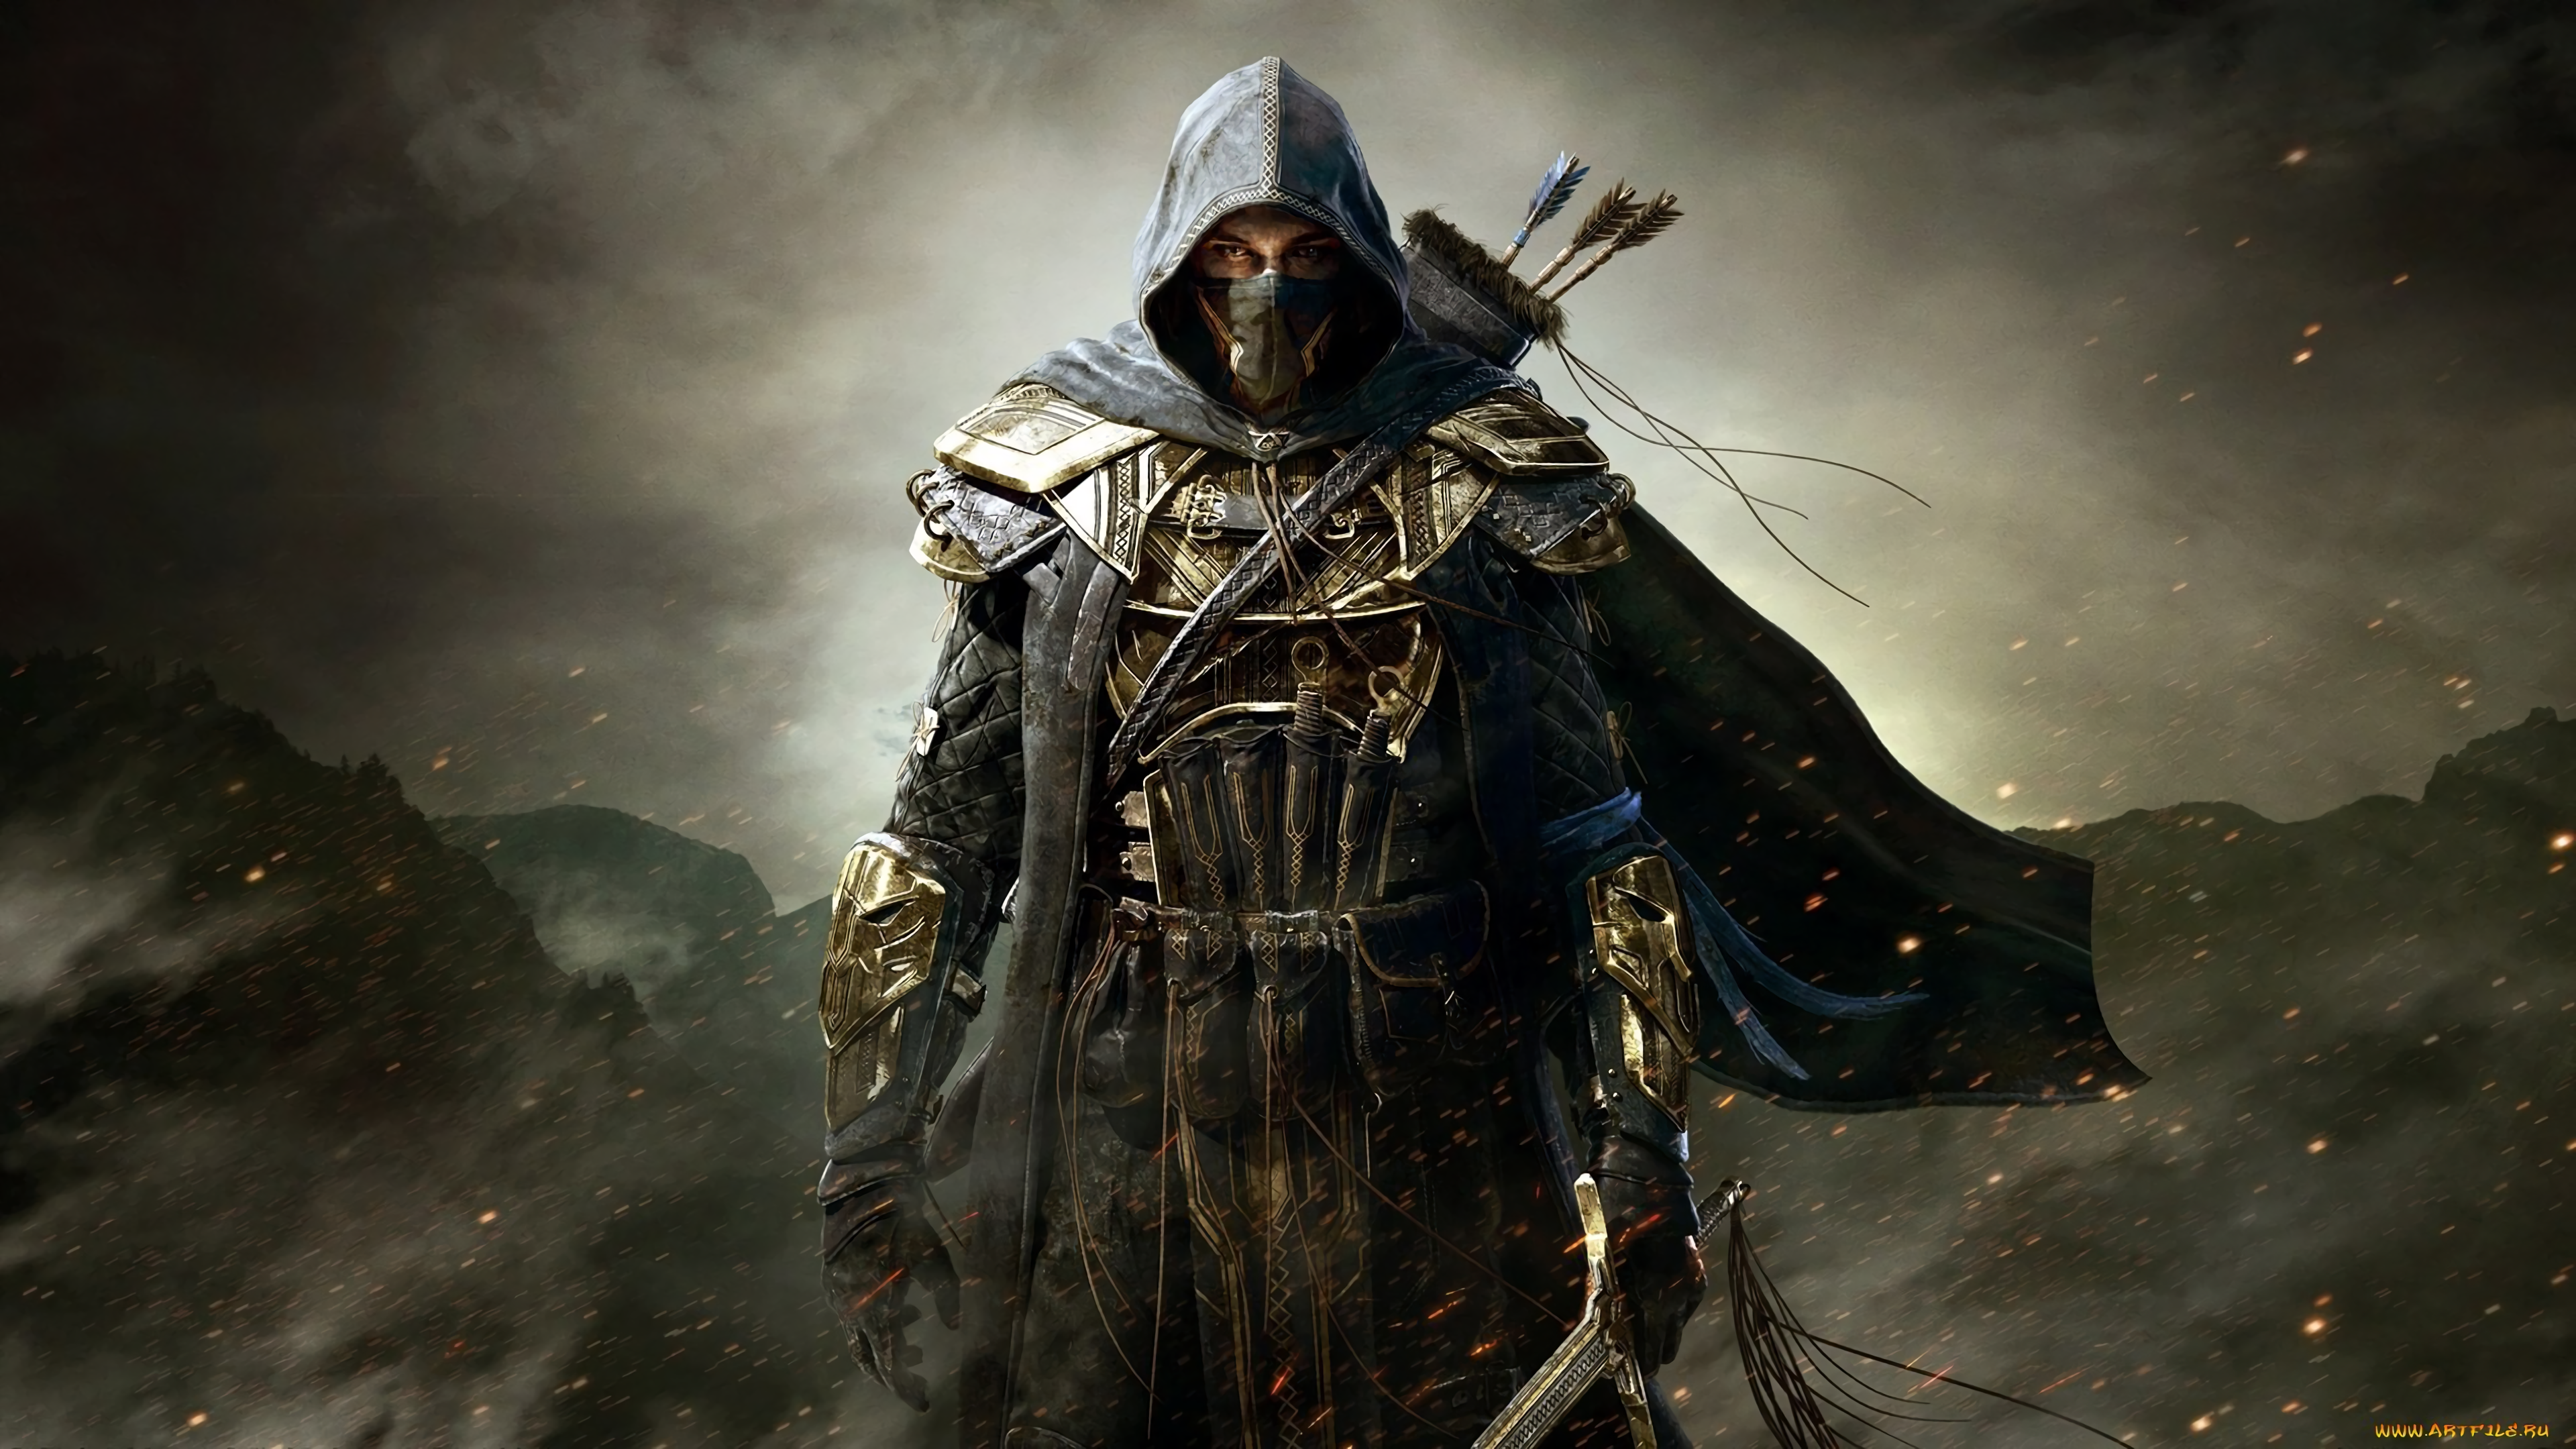 General 3840x2160 Thief video games Video Game Heroes video game art PC gaming video game men video game characters